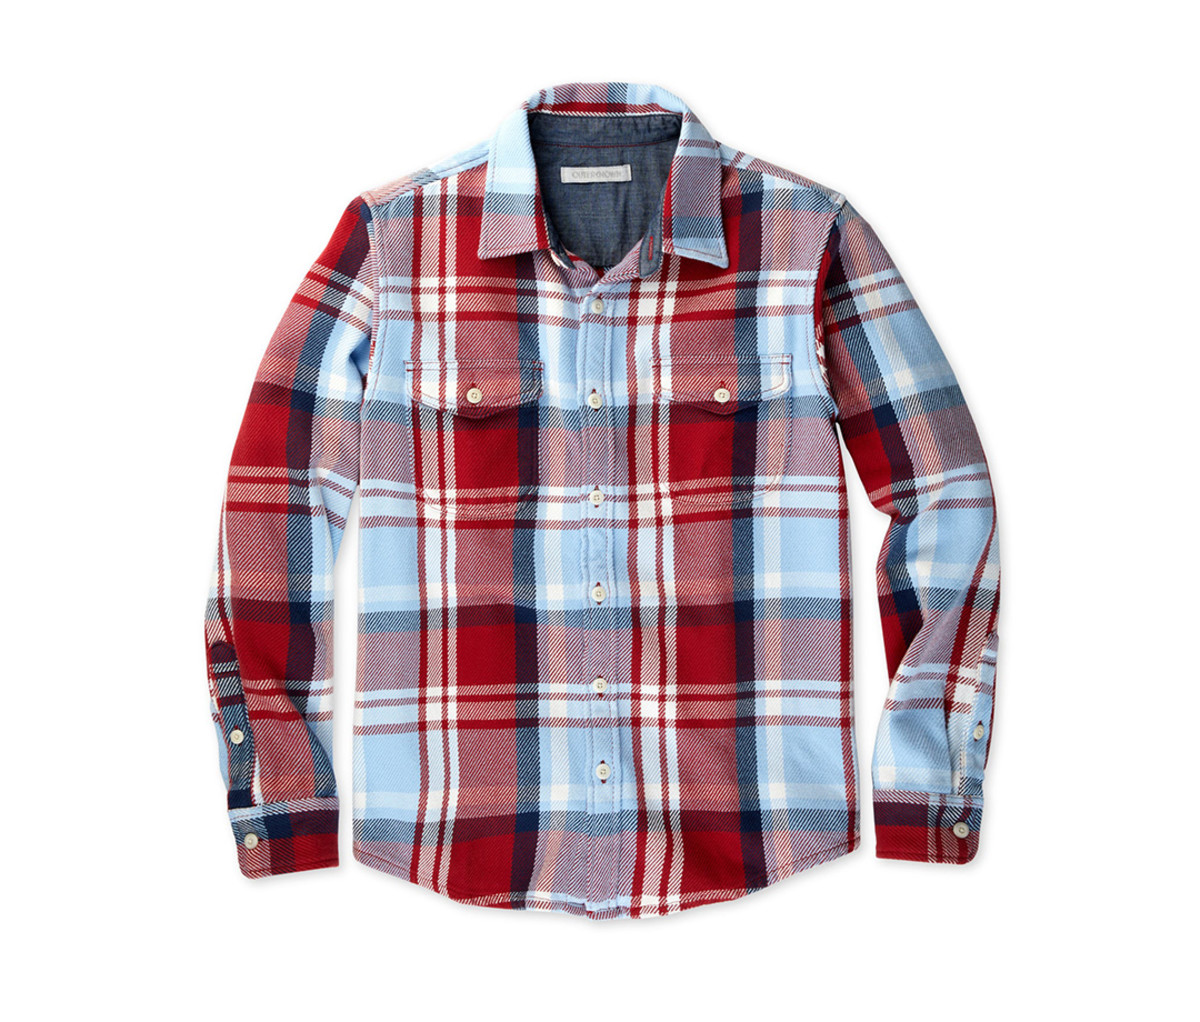 The Blanket Shirt From Outerknown is An Ideal Fall Fashion Pickup - Men ...